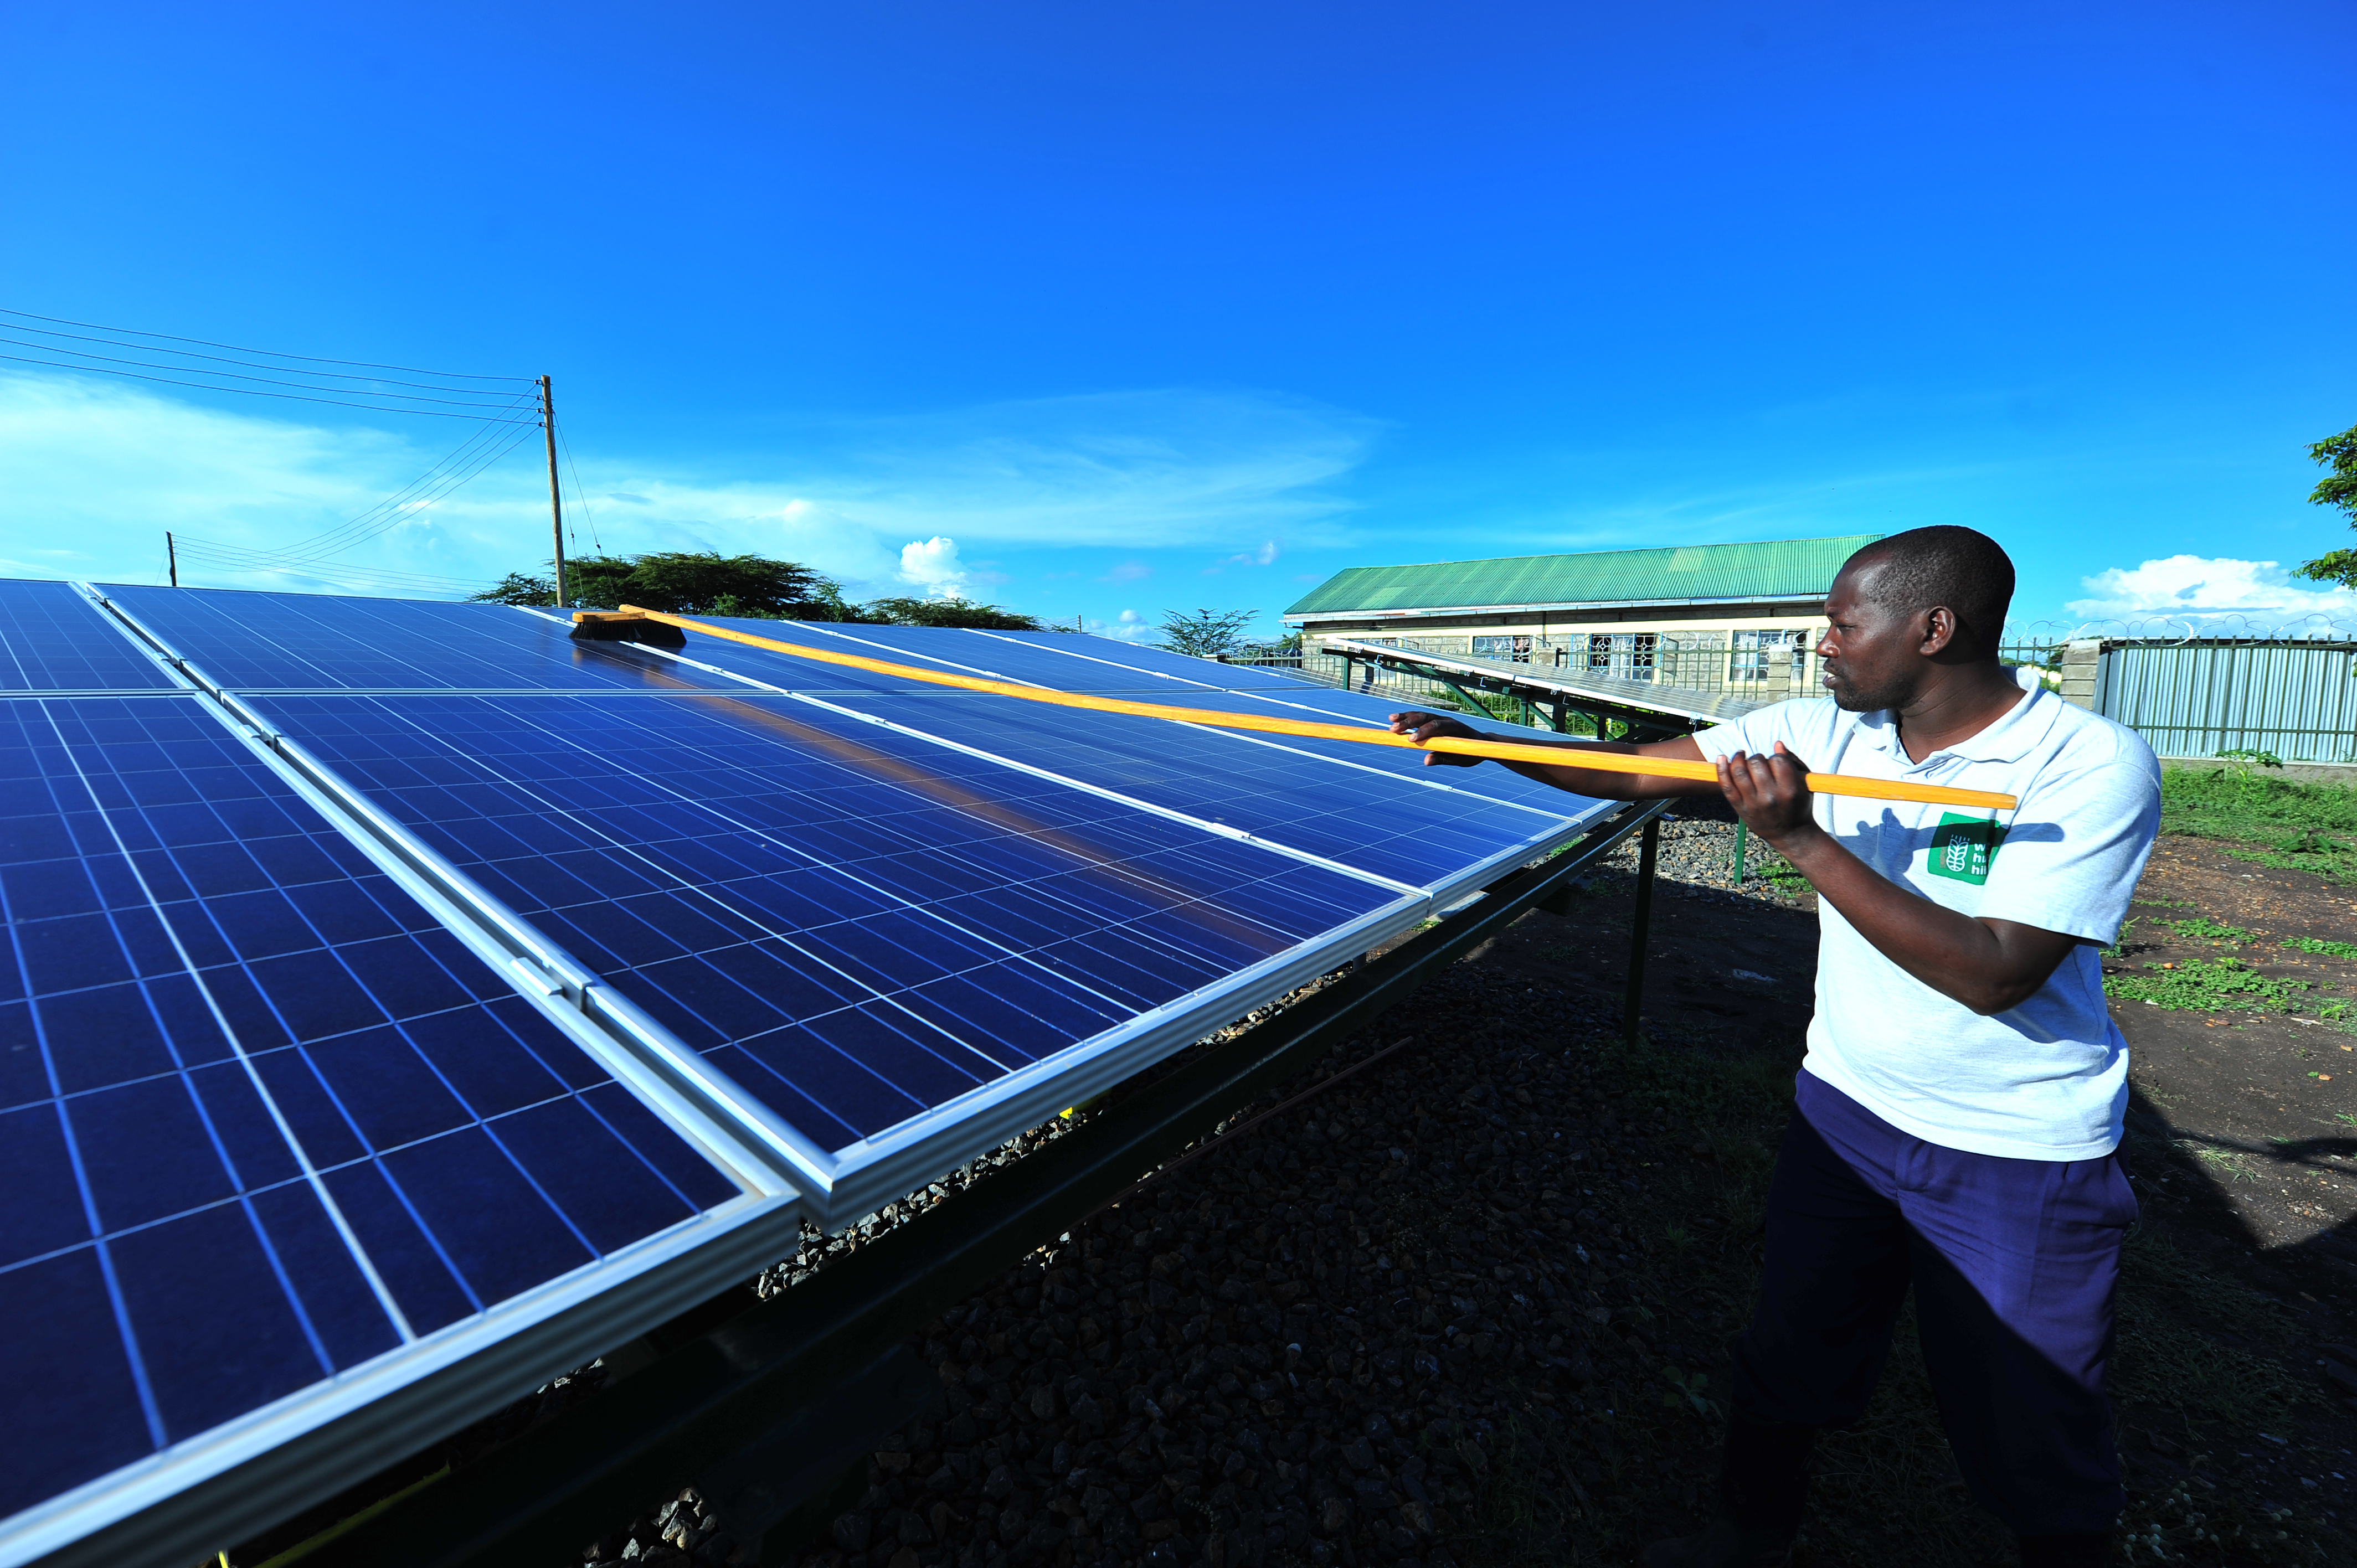 Silandoi Matikoi caretaker of Talek Solar Power Plant in Narok County, Kenya cleans the solar panels used to supply power to the residents of Talek town. Constructed with the help of the German government, the power plant will supply clean green power to the residents of Talek who are not connected to the National power grid